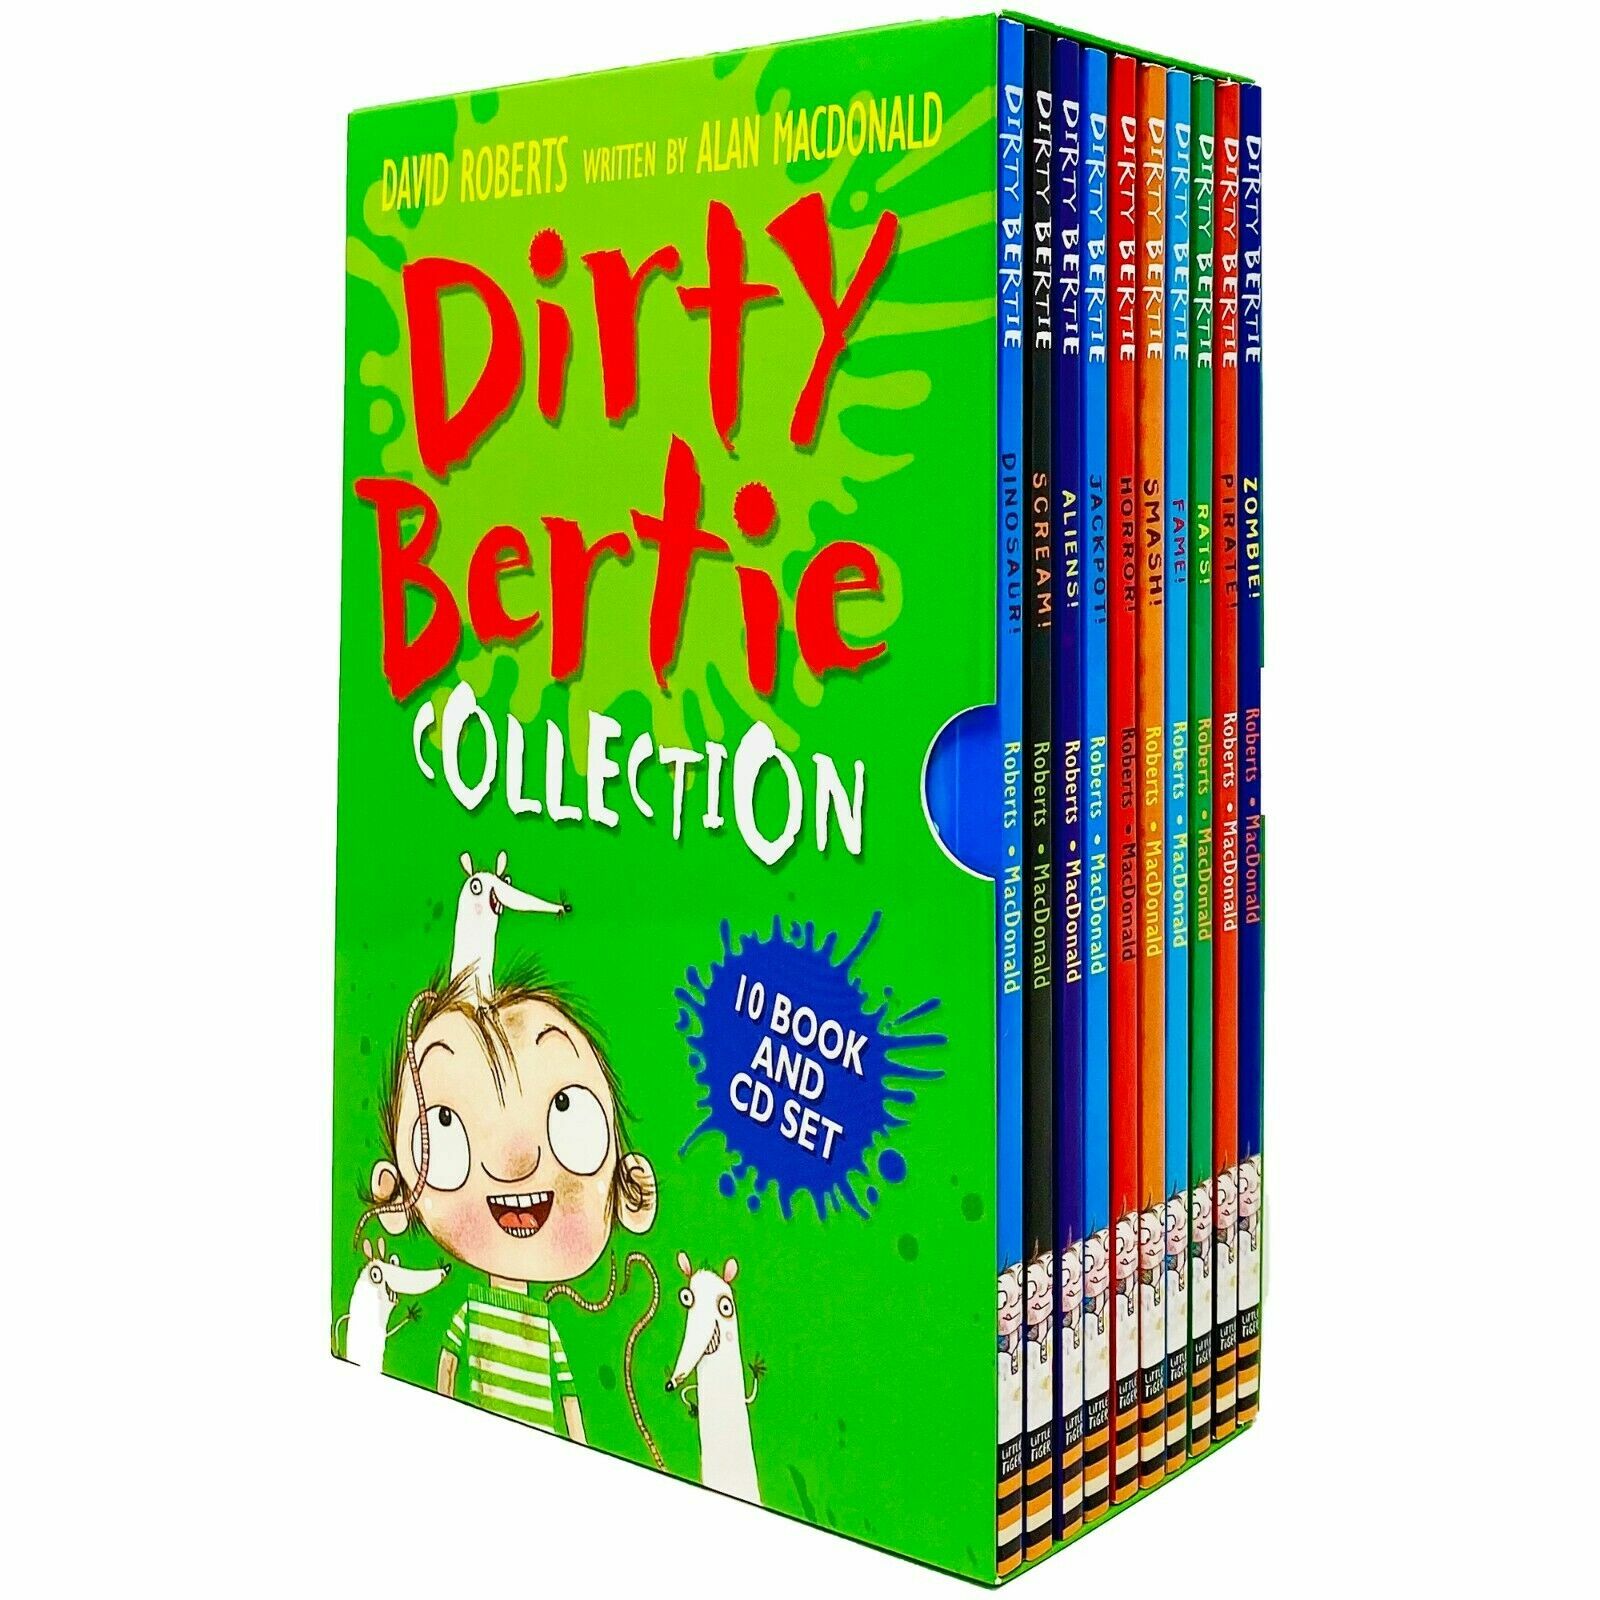 Dirty Bertie Collection 10 Books And CD Set